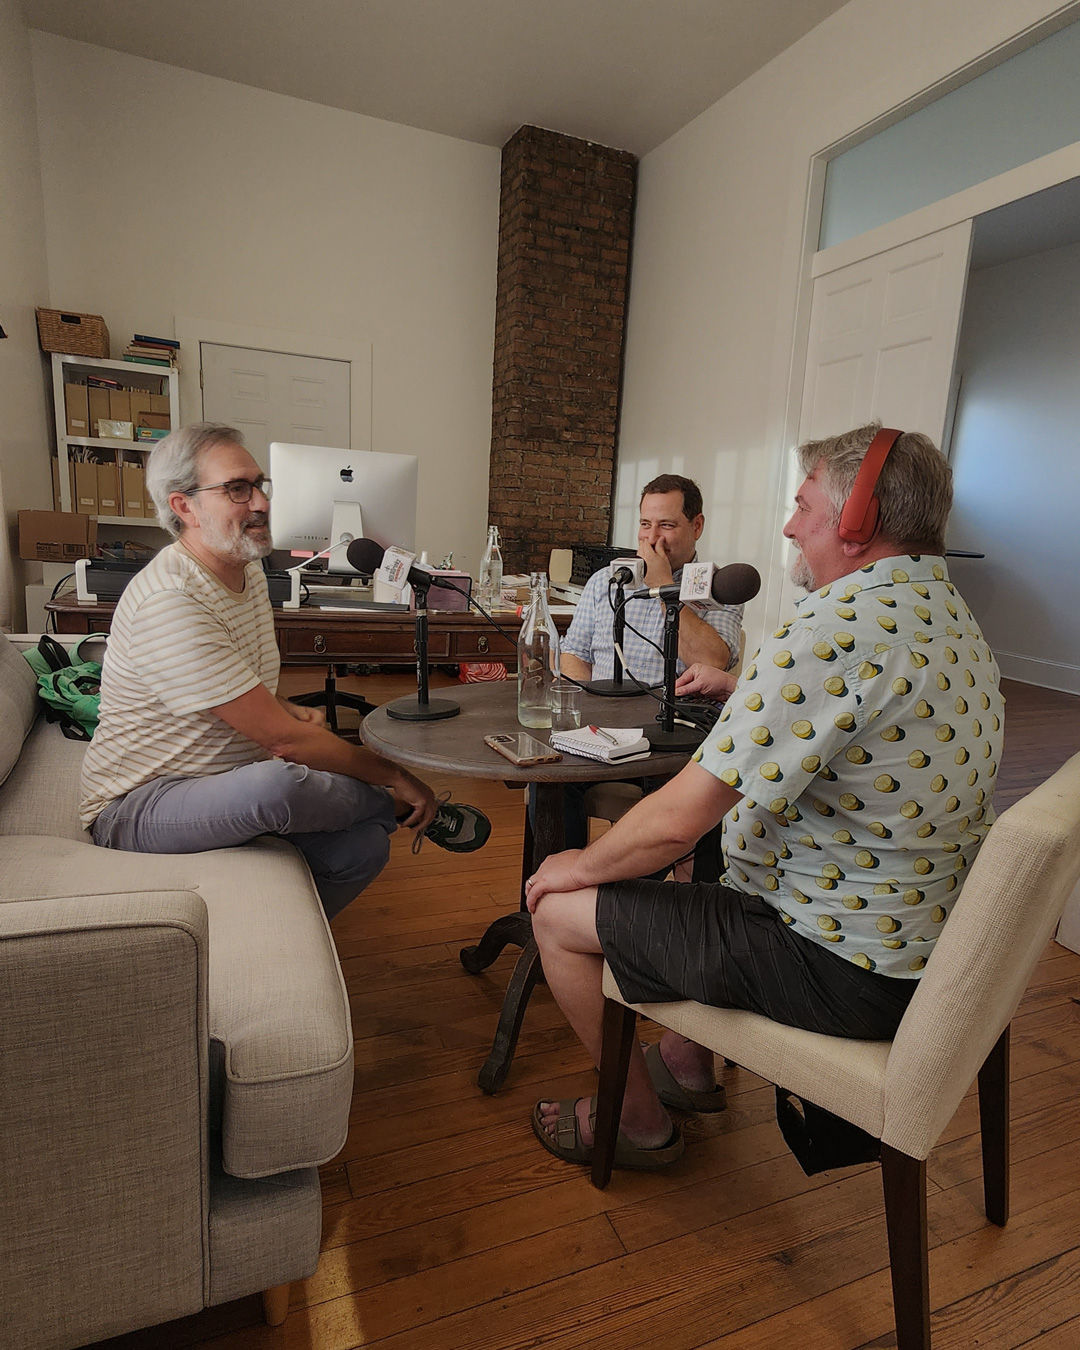 The NOLADrinks Show with Bryan Dias – Neal and Kirk of Cure Co – 2023Ep8. Kirk Estopinal and Neal Bodenheimer of Cure Co. and Bryan Dias of The NOLADrinks Show chatting in the offices of Cure Co. in New Orleans.